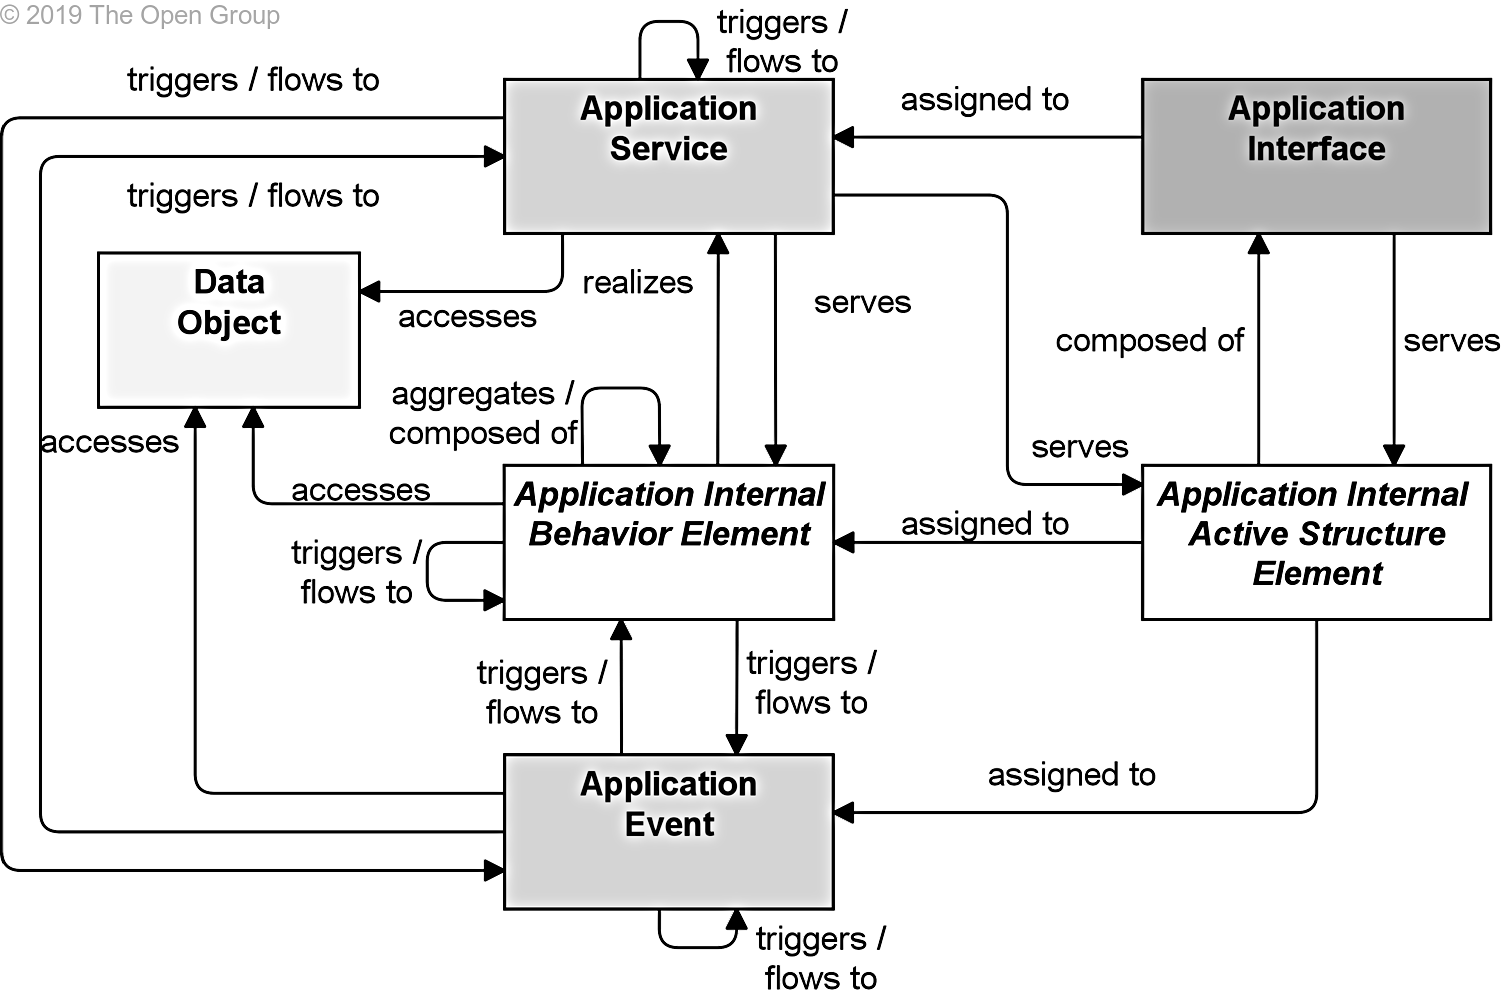 Web Application Architecture: Components, Models, and Types